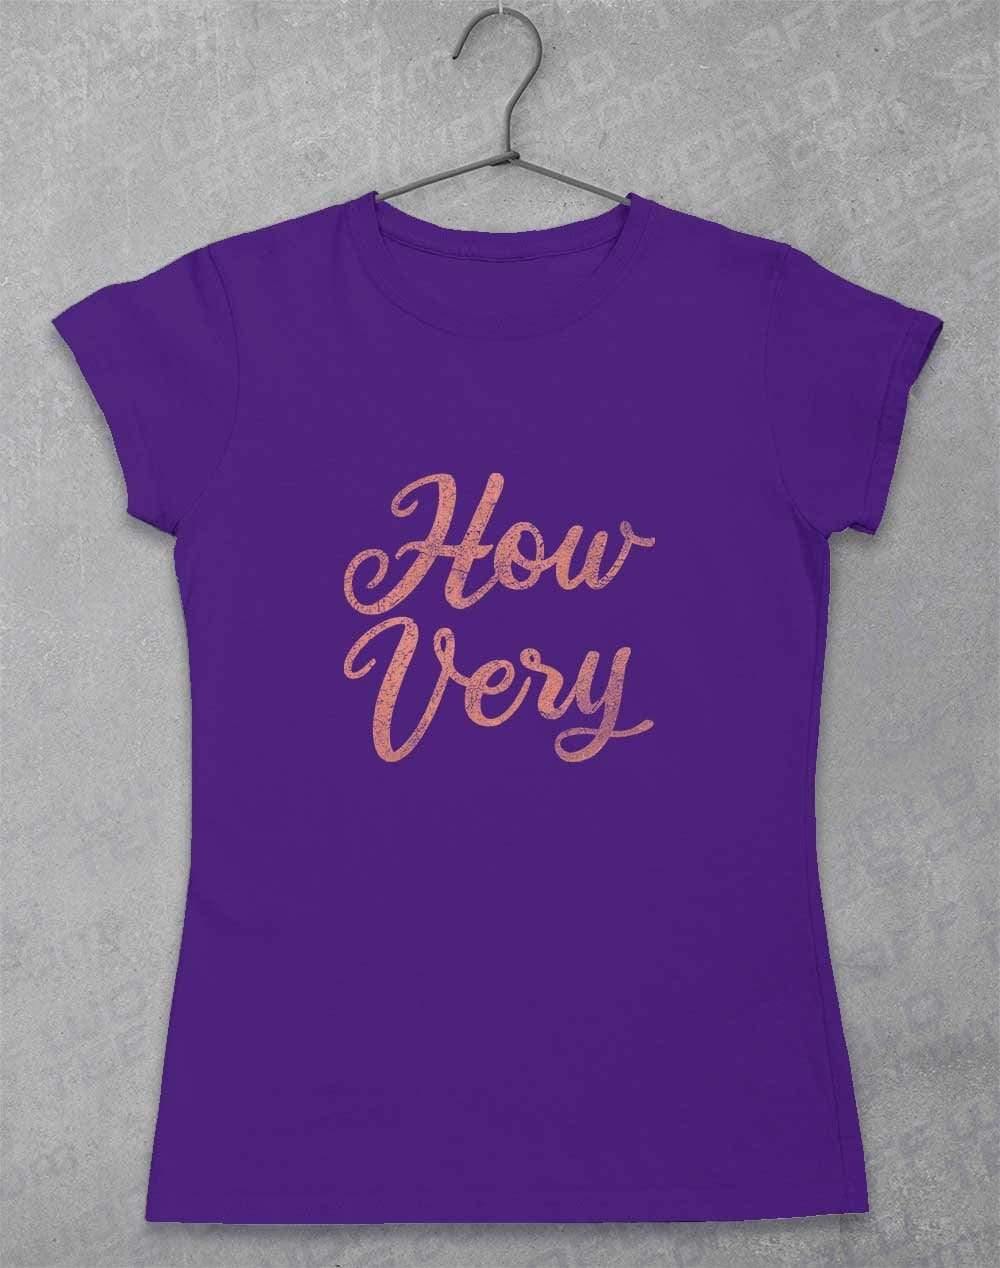 How Very Womens T-Shirt 8-10 / Lilac  - Off World Tees